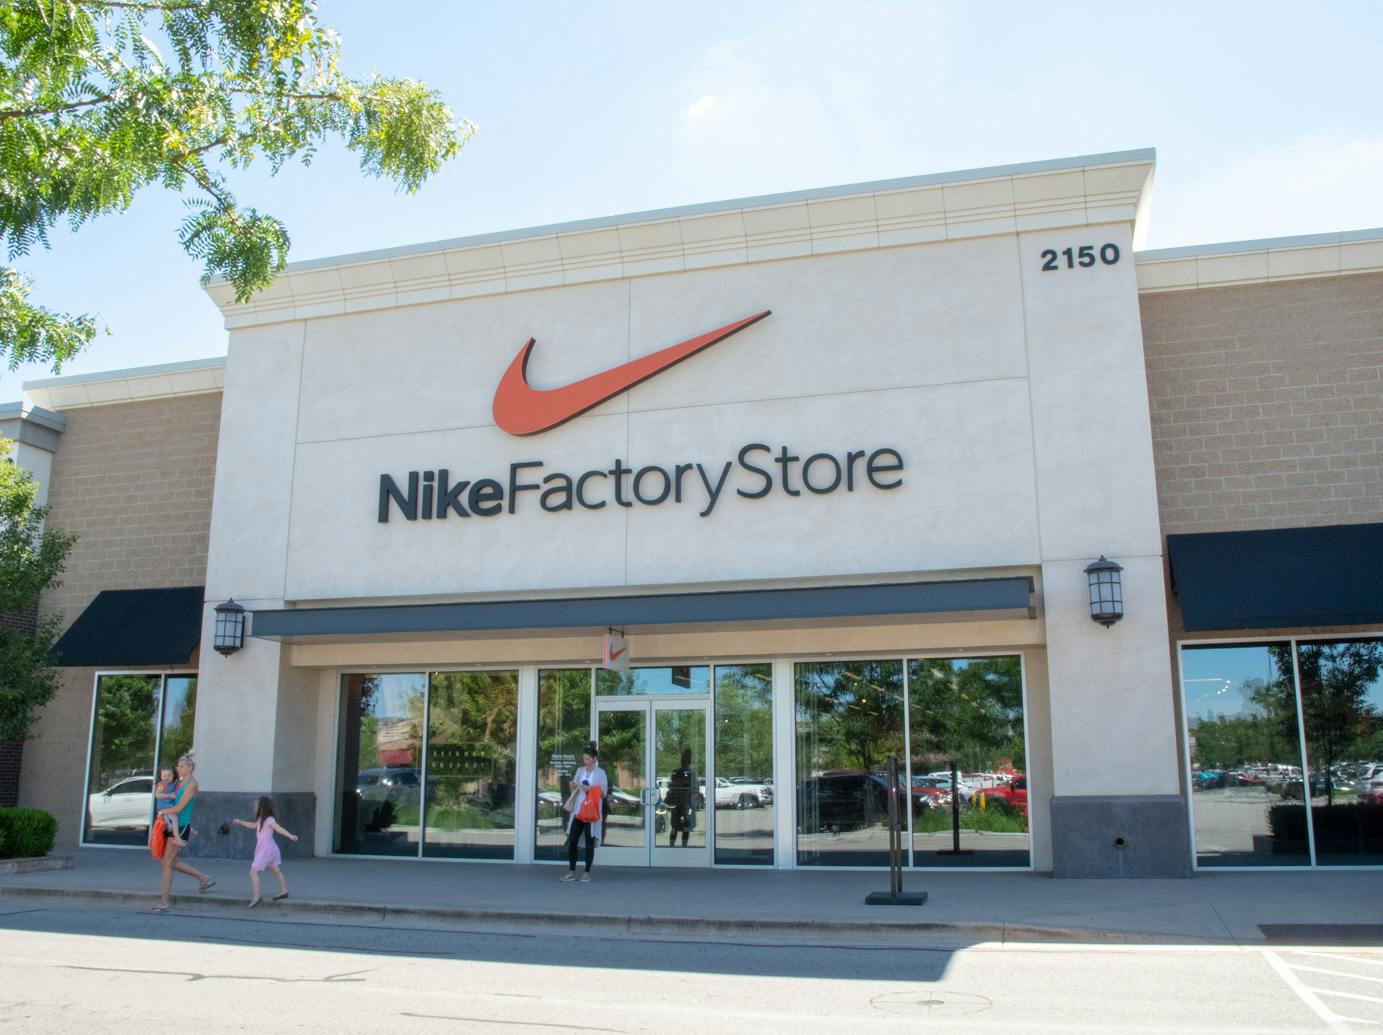 A Nike Factory Store building storefront.